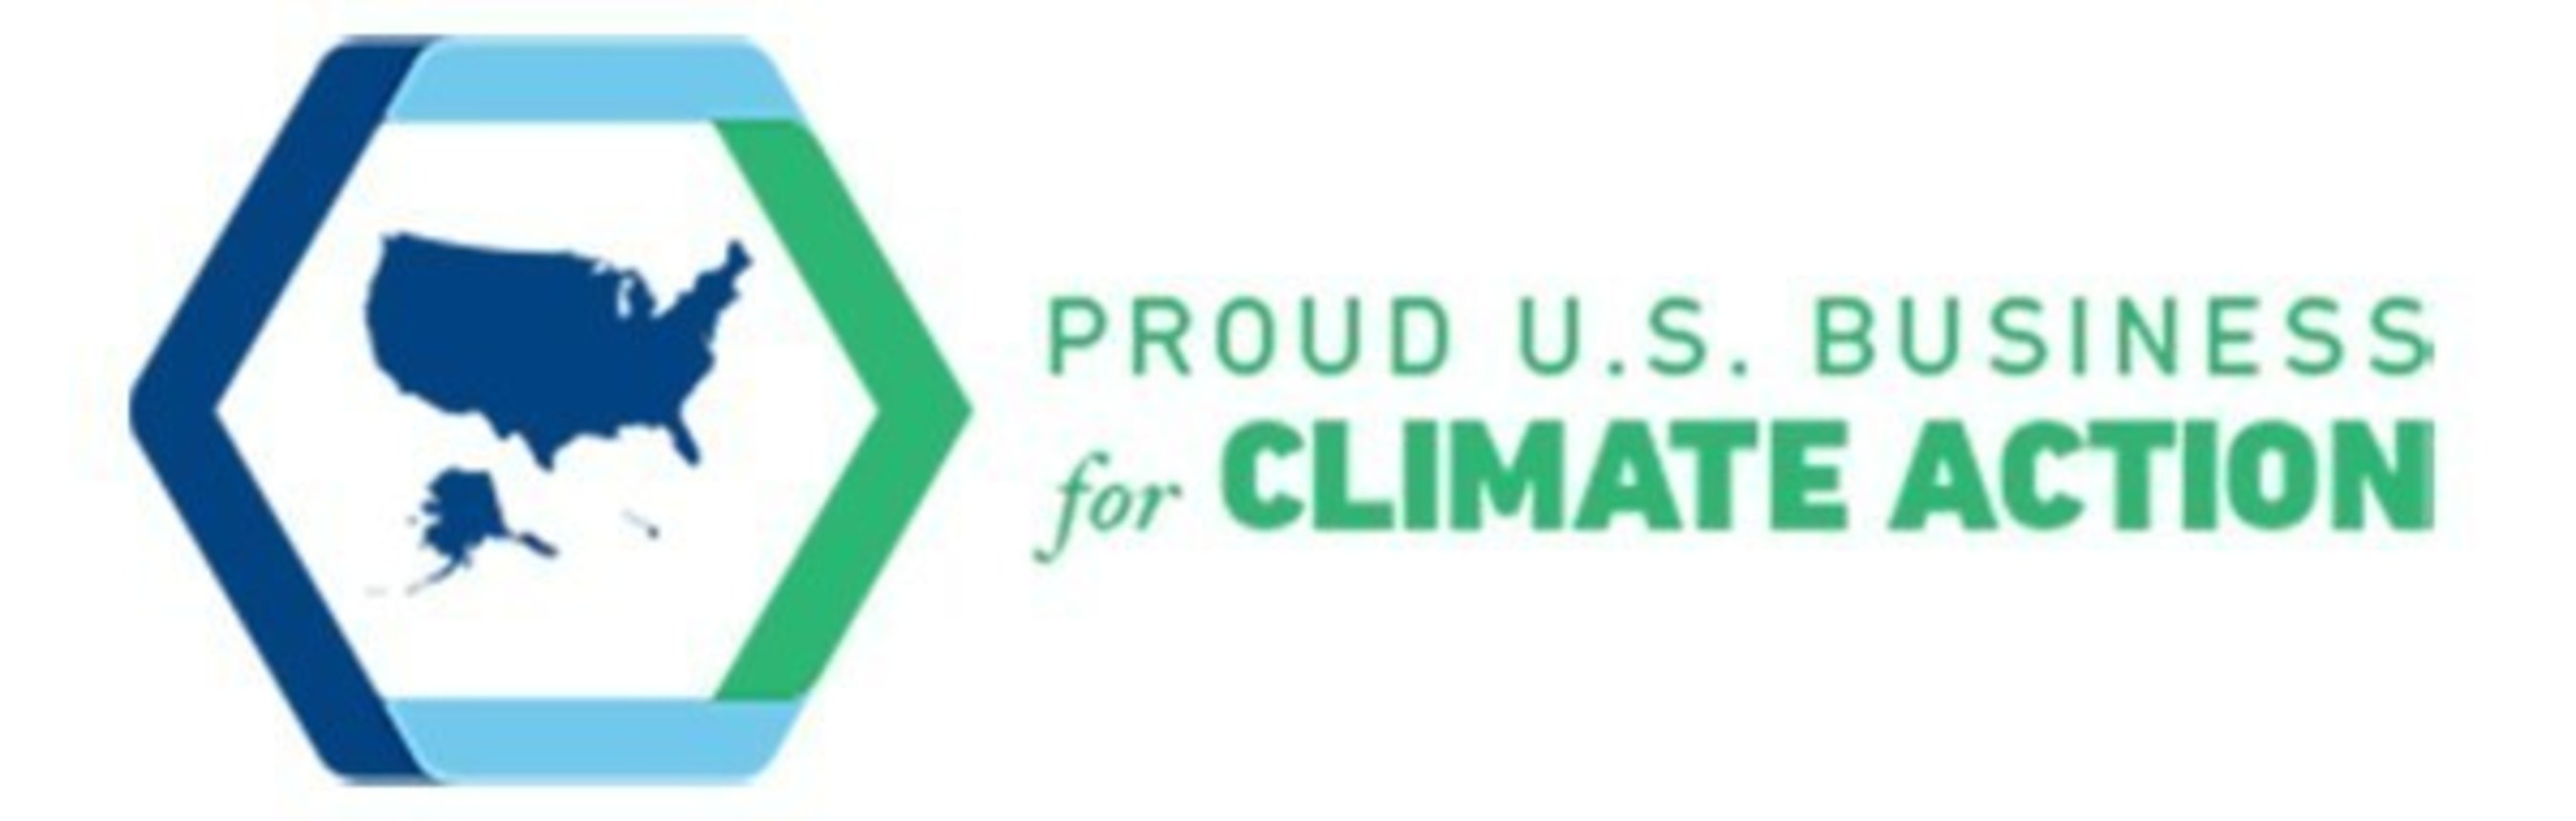 Proud U.S. Business for Climate Action